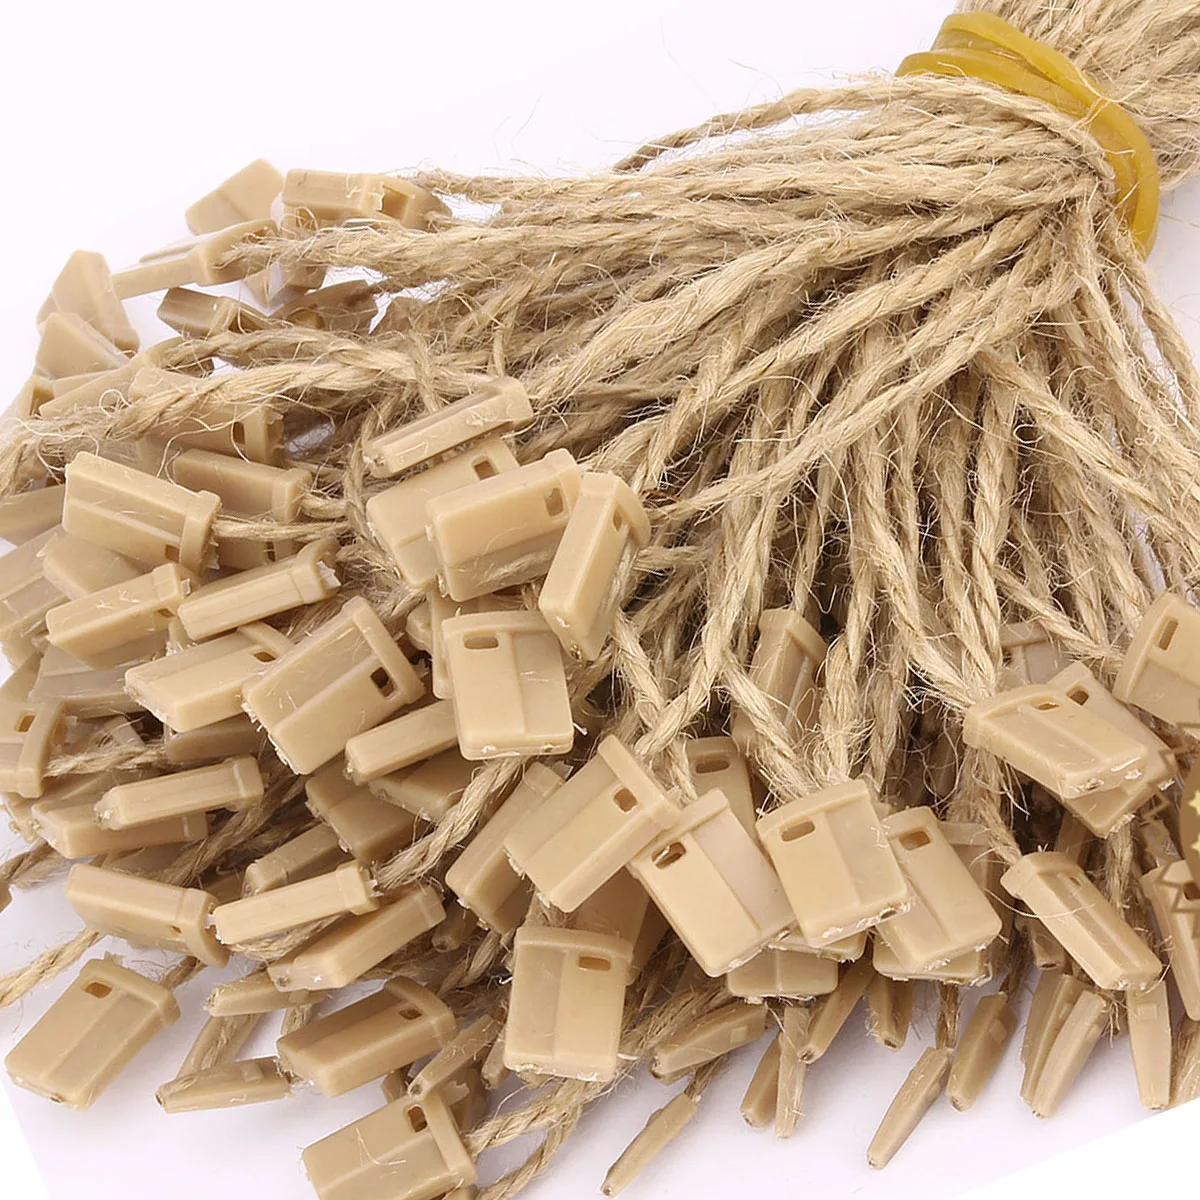 

Hemp Twine String 980 Pcs Hang Tag Fasteners Natural with Snap Lock Ties Easy and Fast to Attach HangTags Jute String